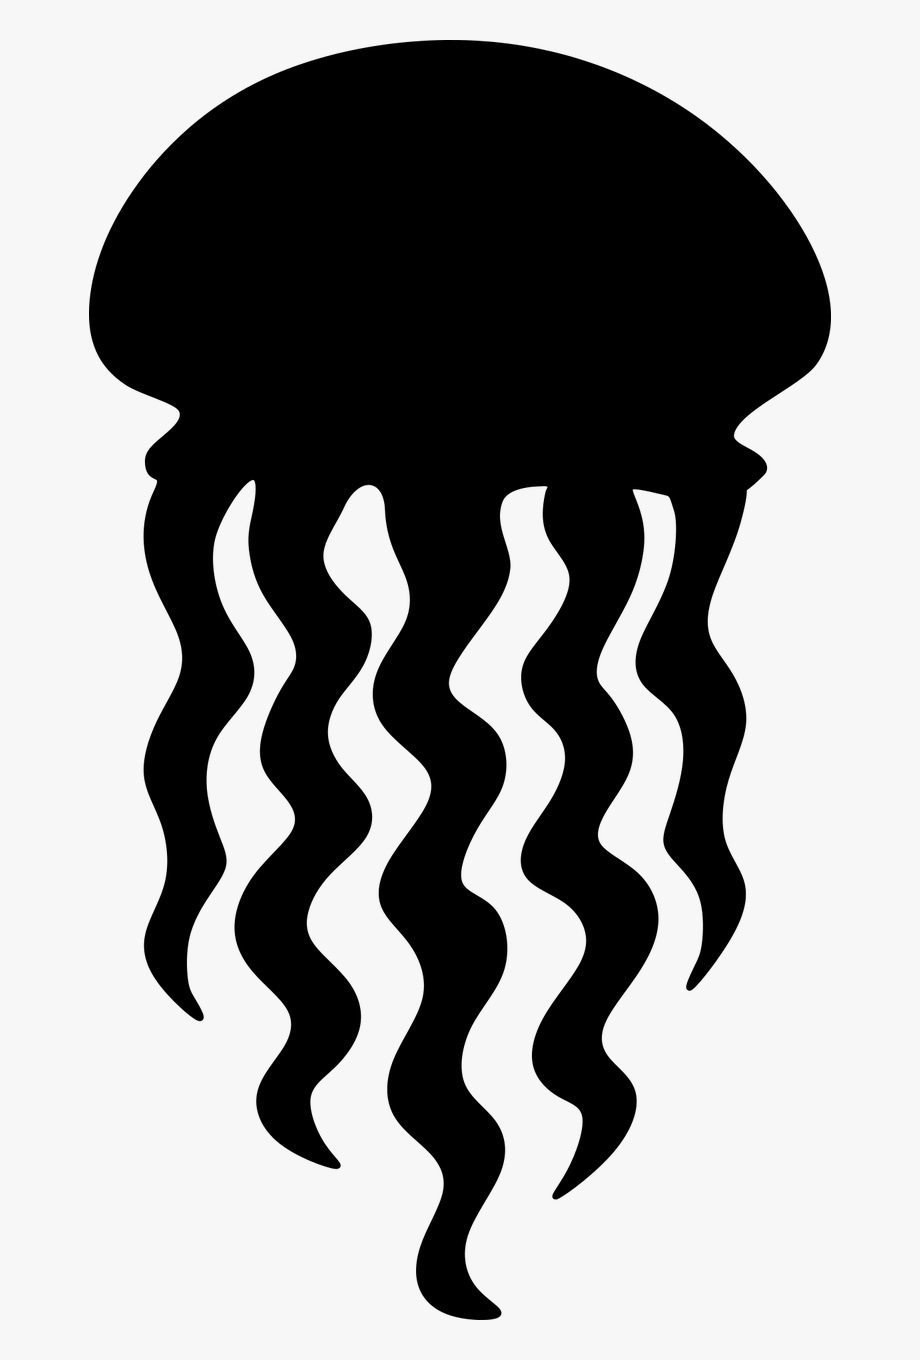 jellyfish clipart silhouette